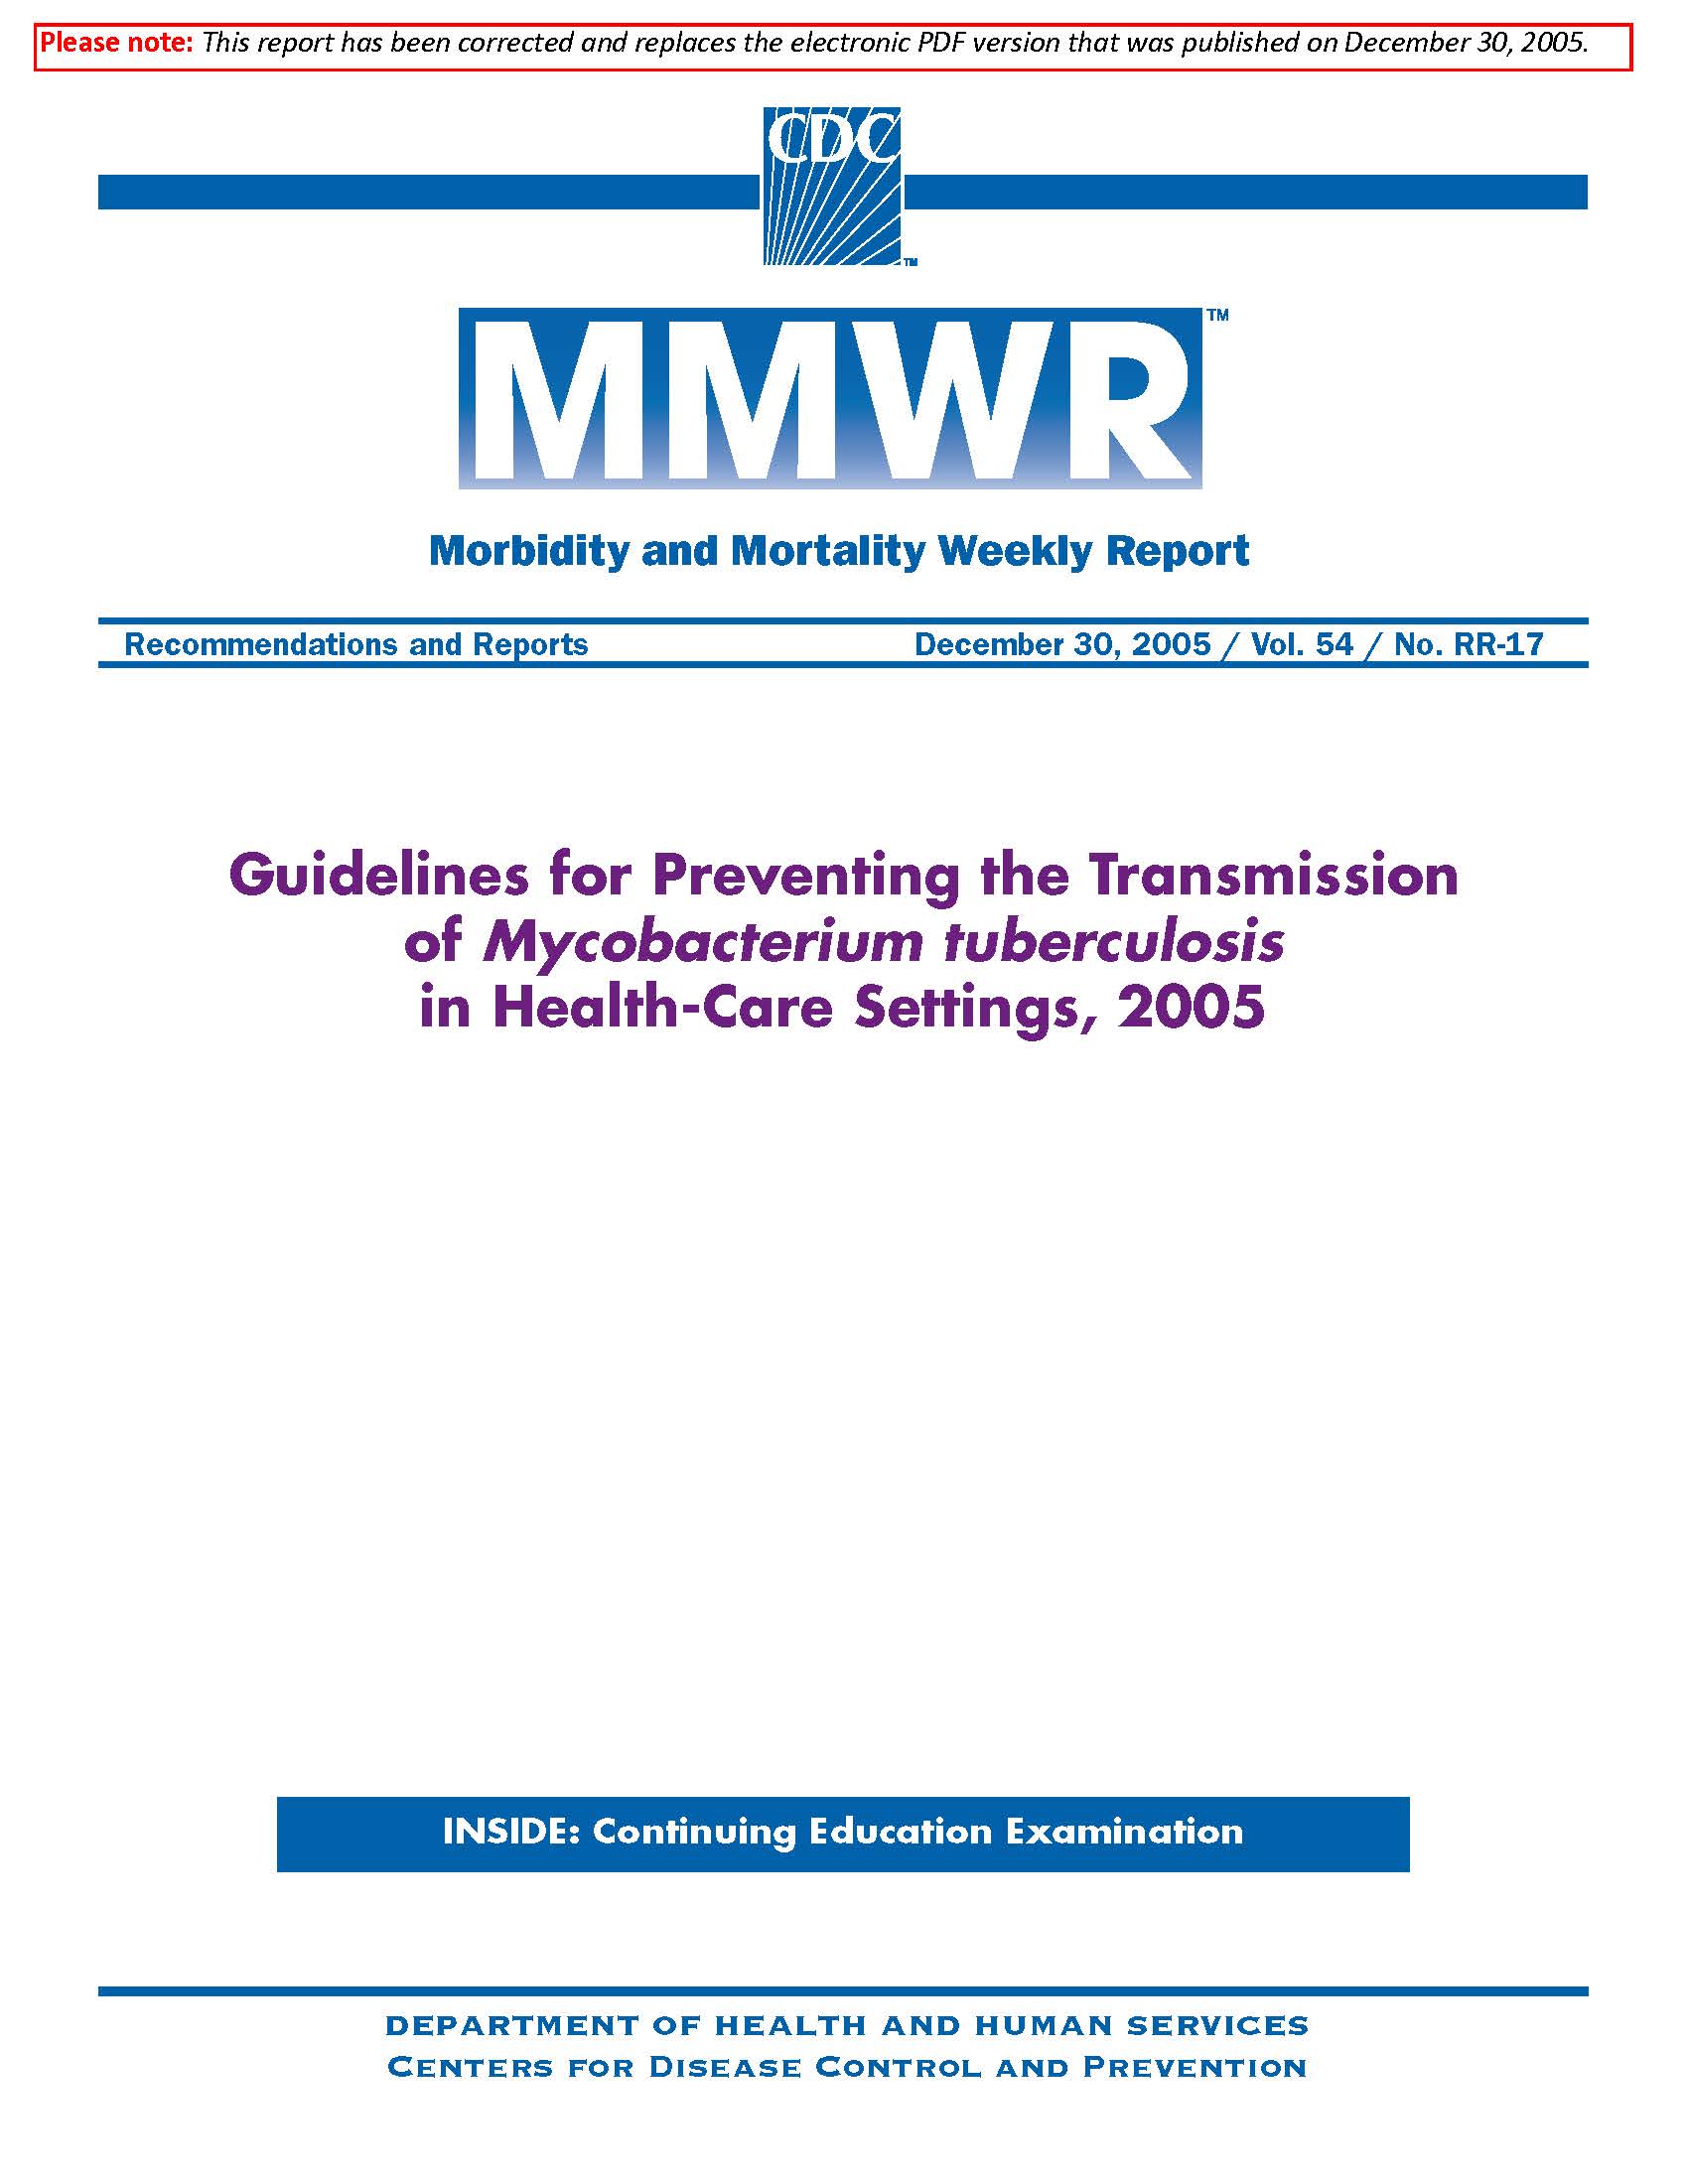 Guidelines Preventing the Transmission of Mycobacterium tuberculosis in Health-Care Settings, 2005 pdf image